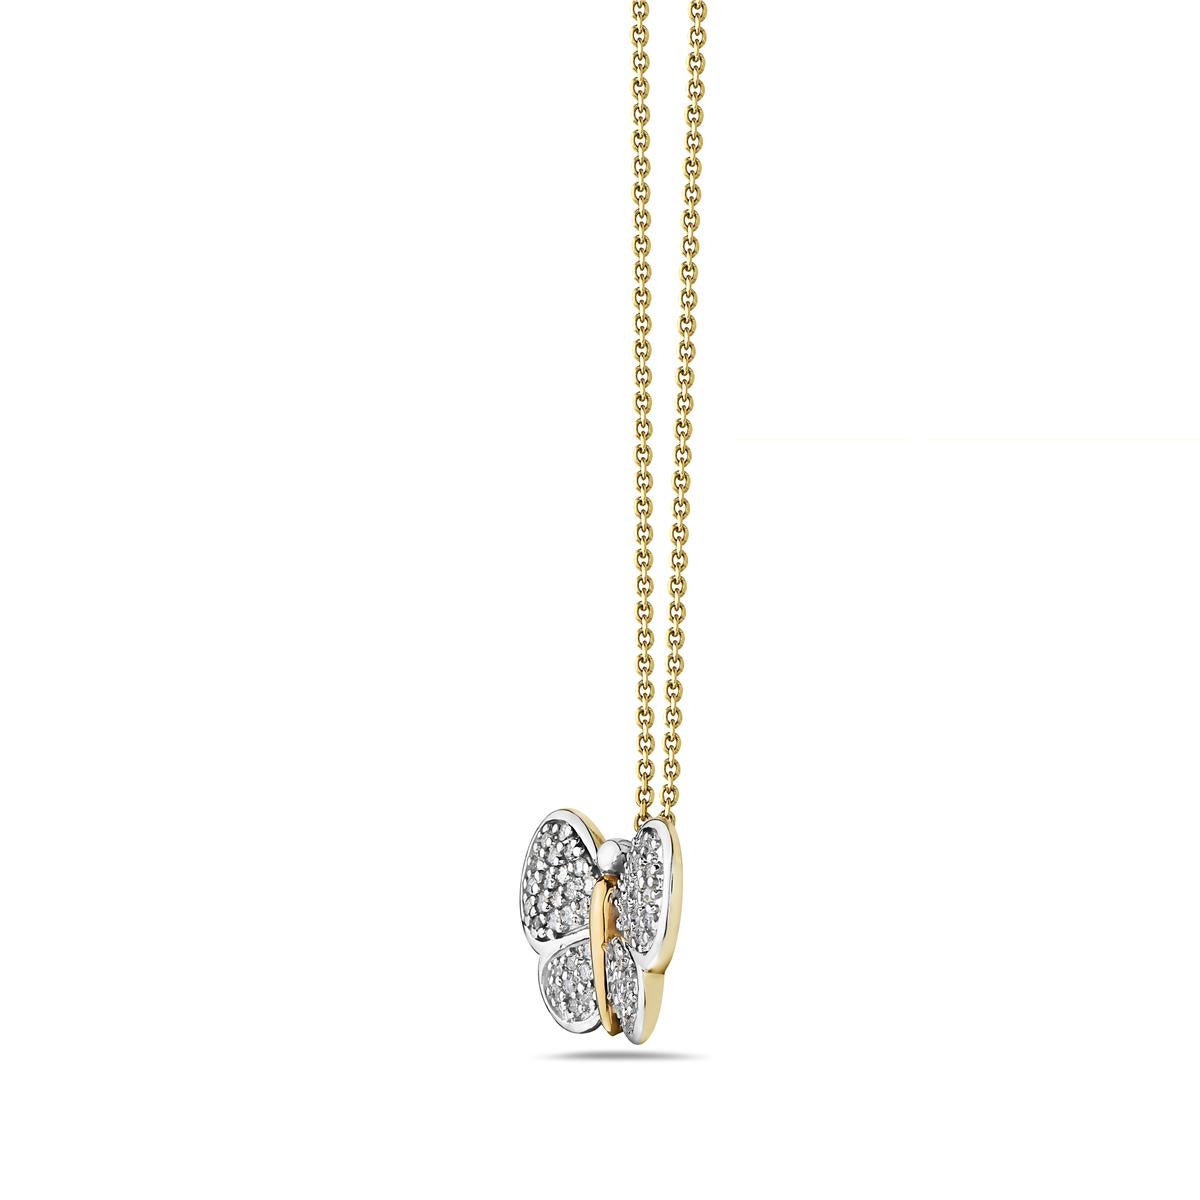 This necklace features 0.55 carats of diamonds set in 14K yellow and white gold. Made in USA

Viewings available in our NYC showroom by appointment.
